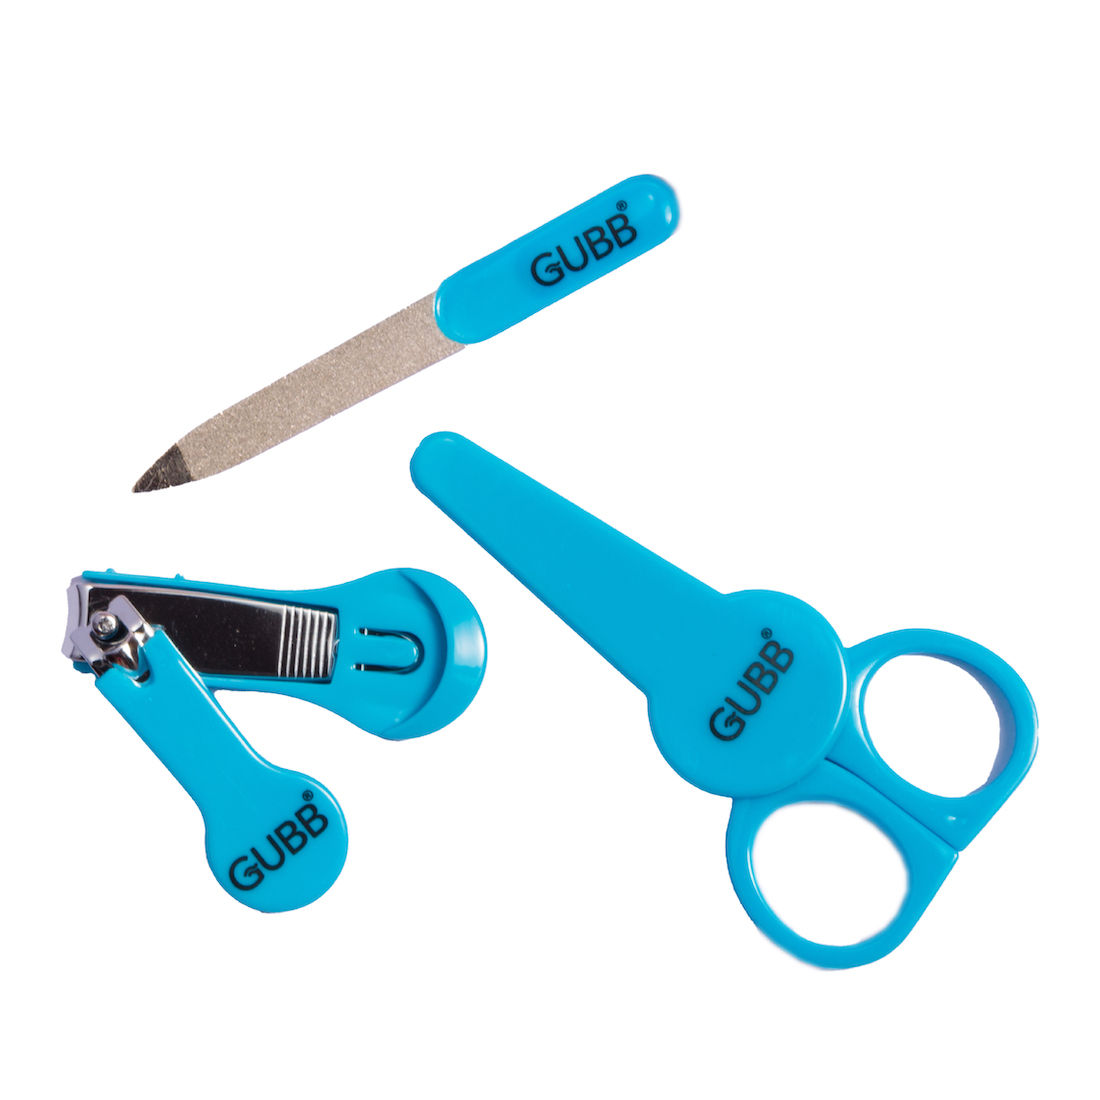 GUBB Baby Manicure Kit for Newborn Blue- Nail Cutter for Babies, Nail Scissors for Baby Boy